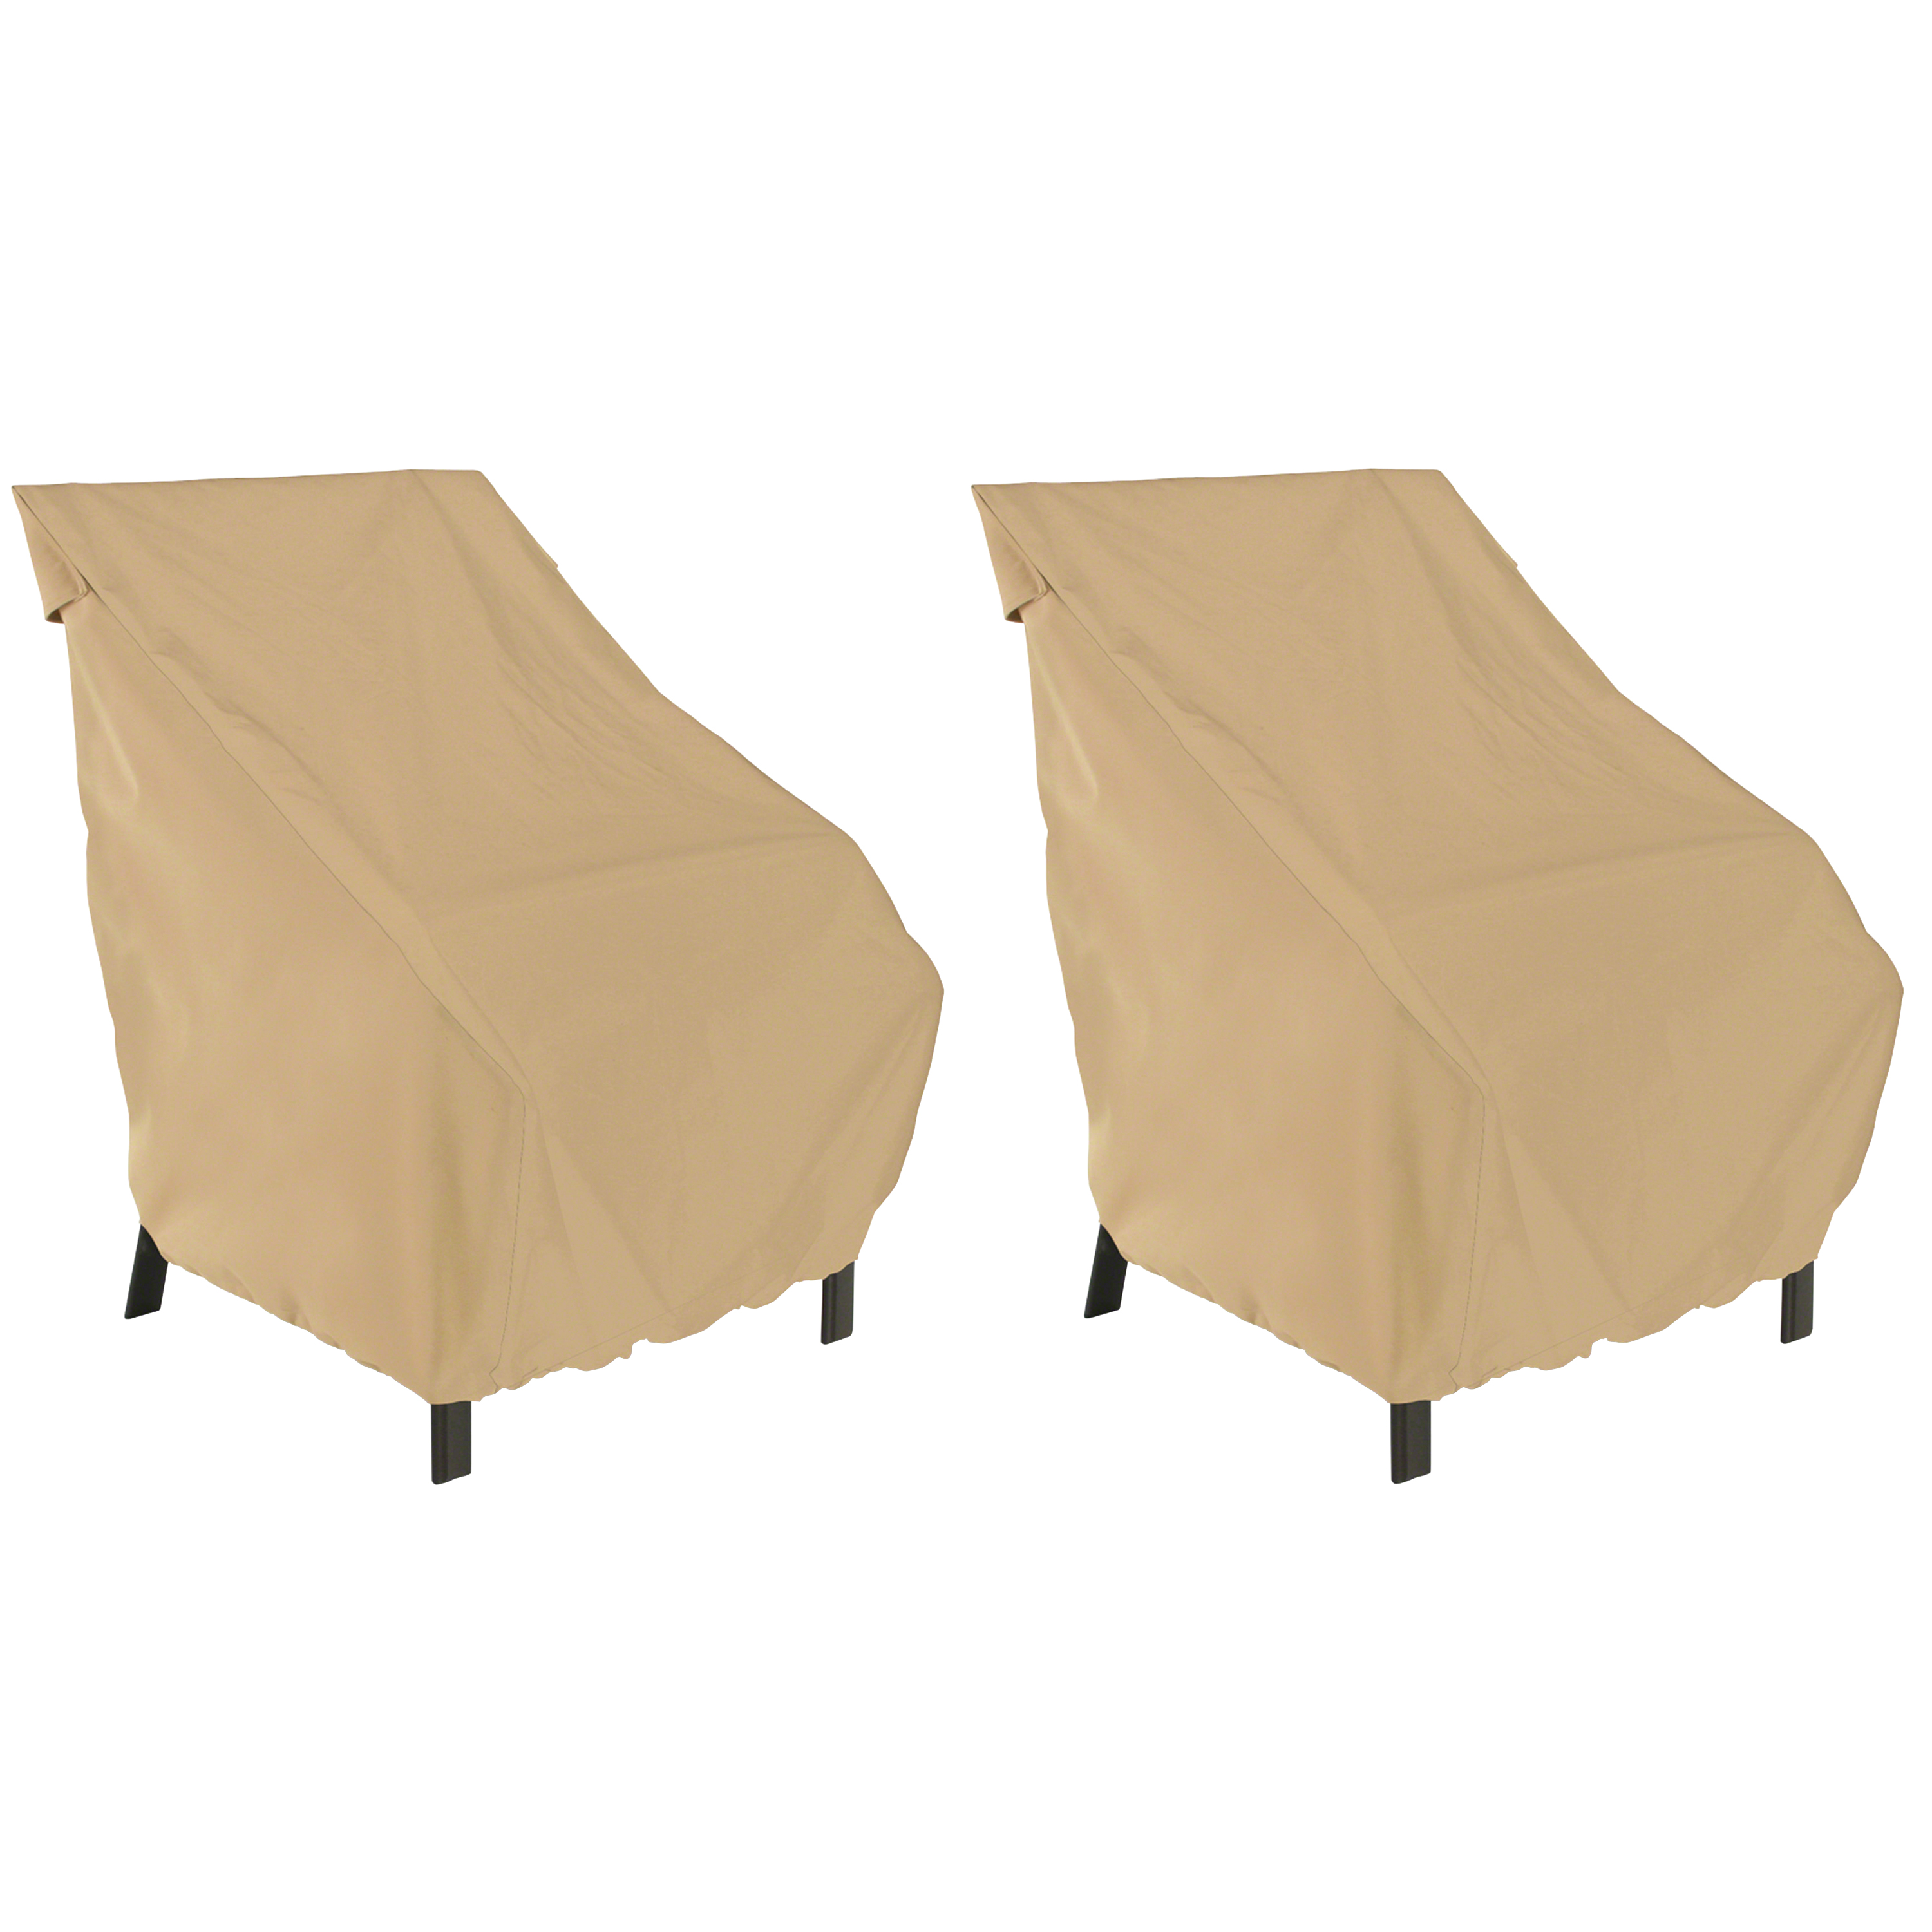 Classic Accessories Terrazzo High Back Patio Chair Cover, 58932, Set of 2